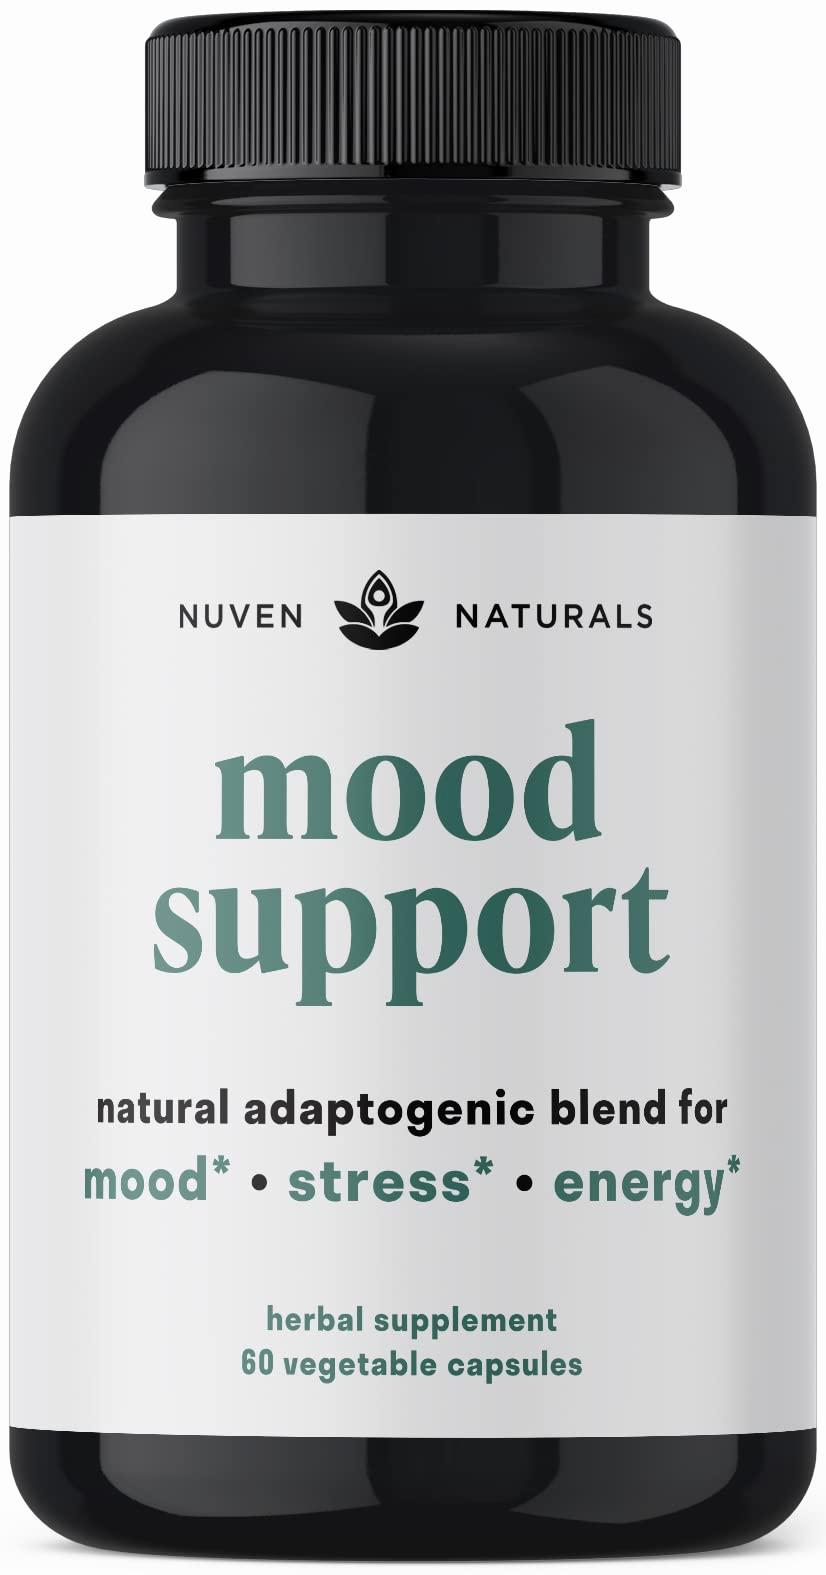 A black bottle of Nuven Naturals Mood Support capsules.